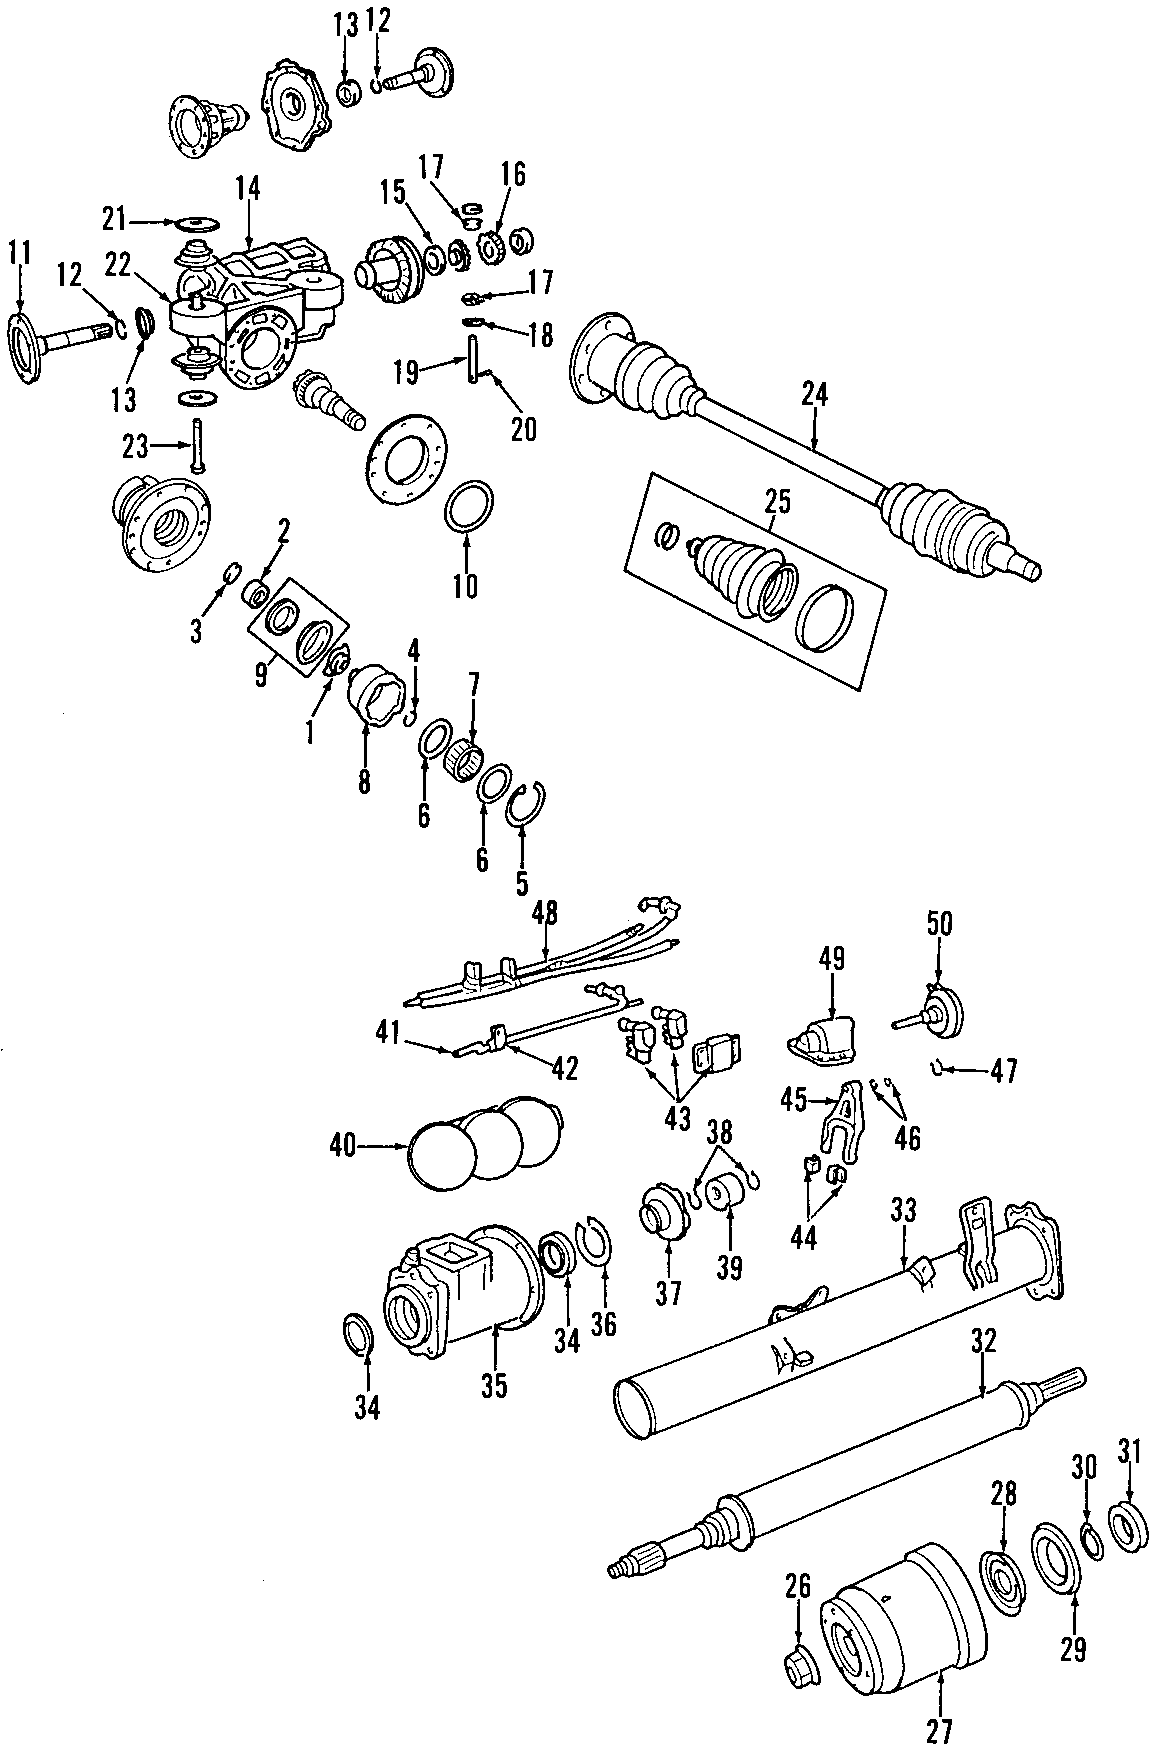 21DRIVE AXLES. REAR AXLE. AXLE SHAFTS & JOINTS. DIFFERENTIAL. PROPELLER SHAFT.https://images.simplepart.com/images/parts/motor/fullsize/T040085.png